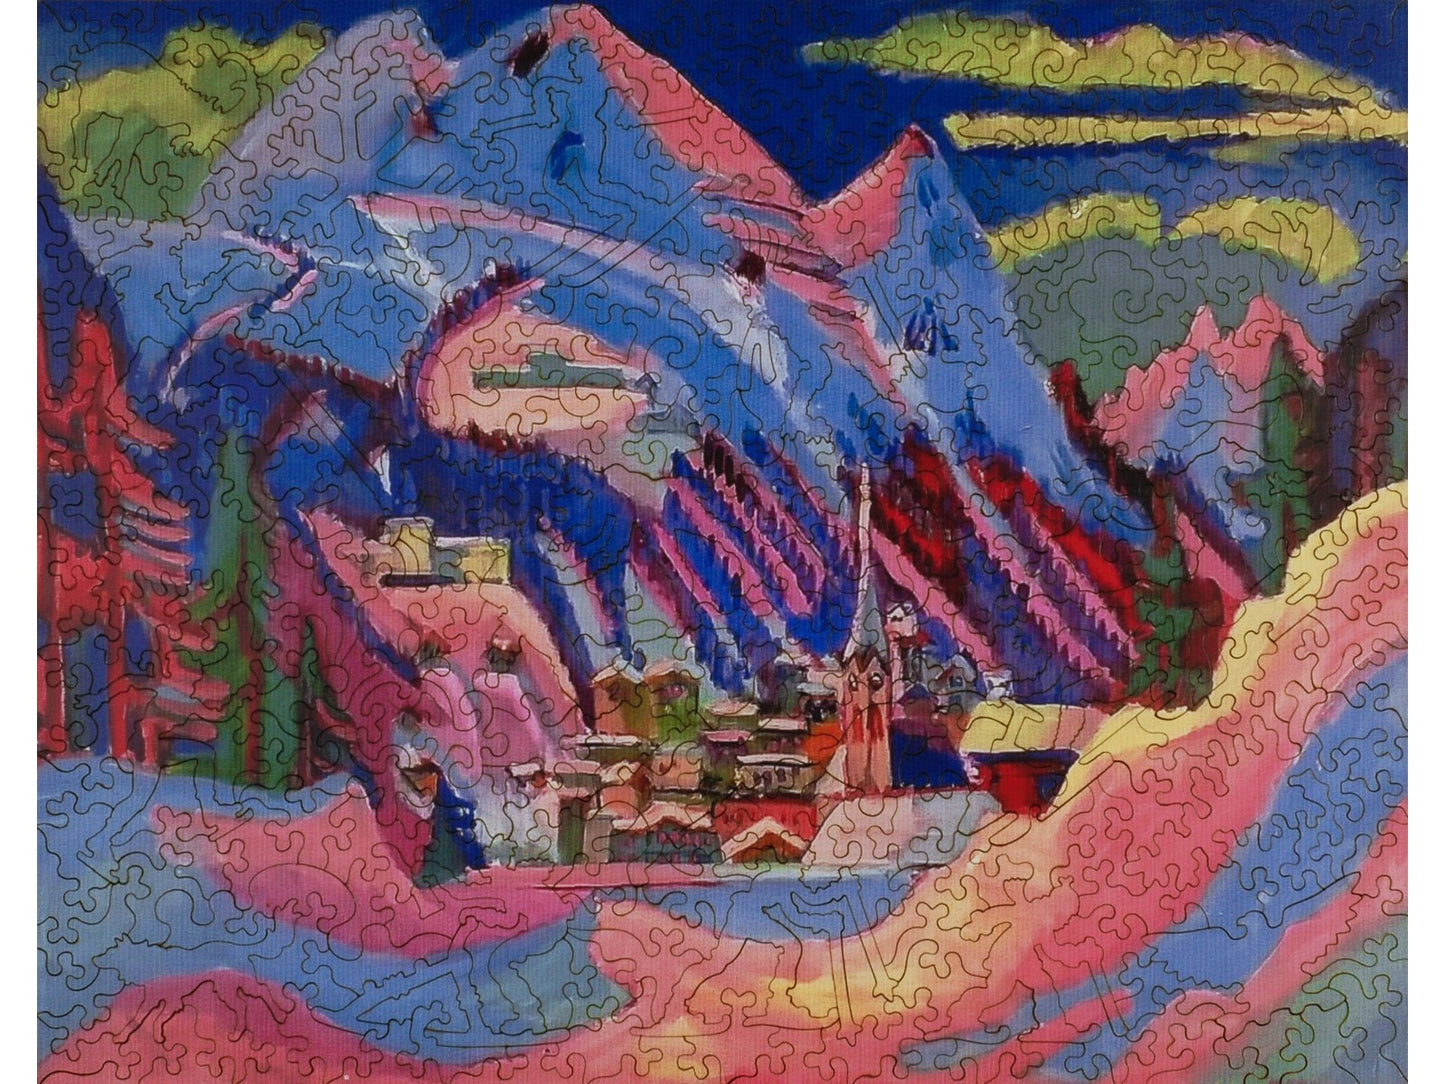 The front of the puzzle, Davos in Winter, which shows a mountain village in the winter.